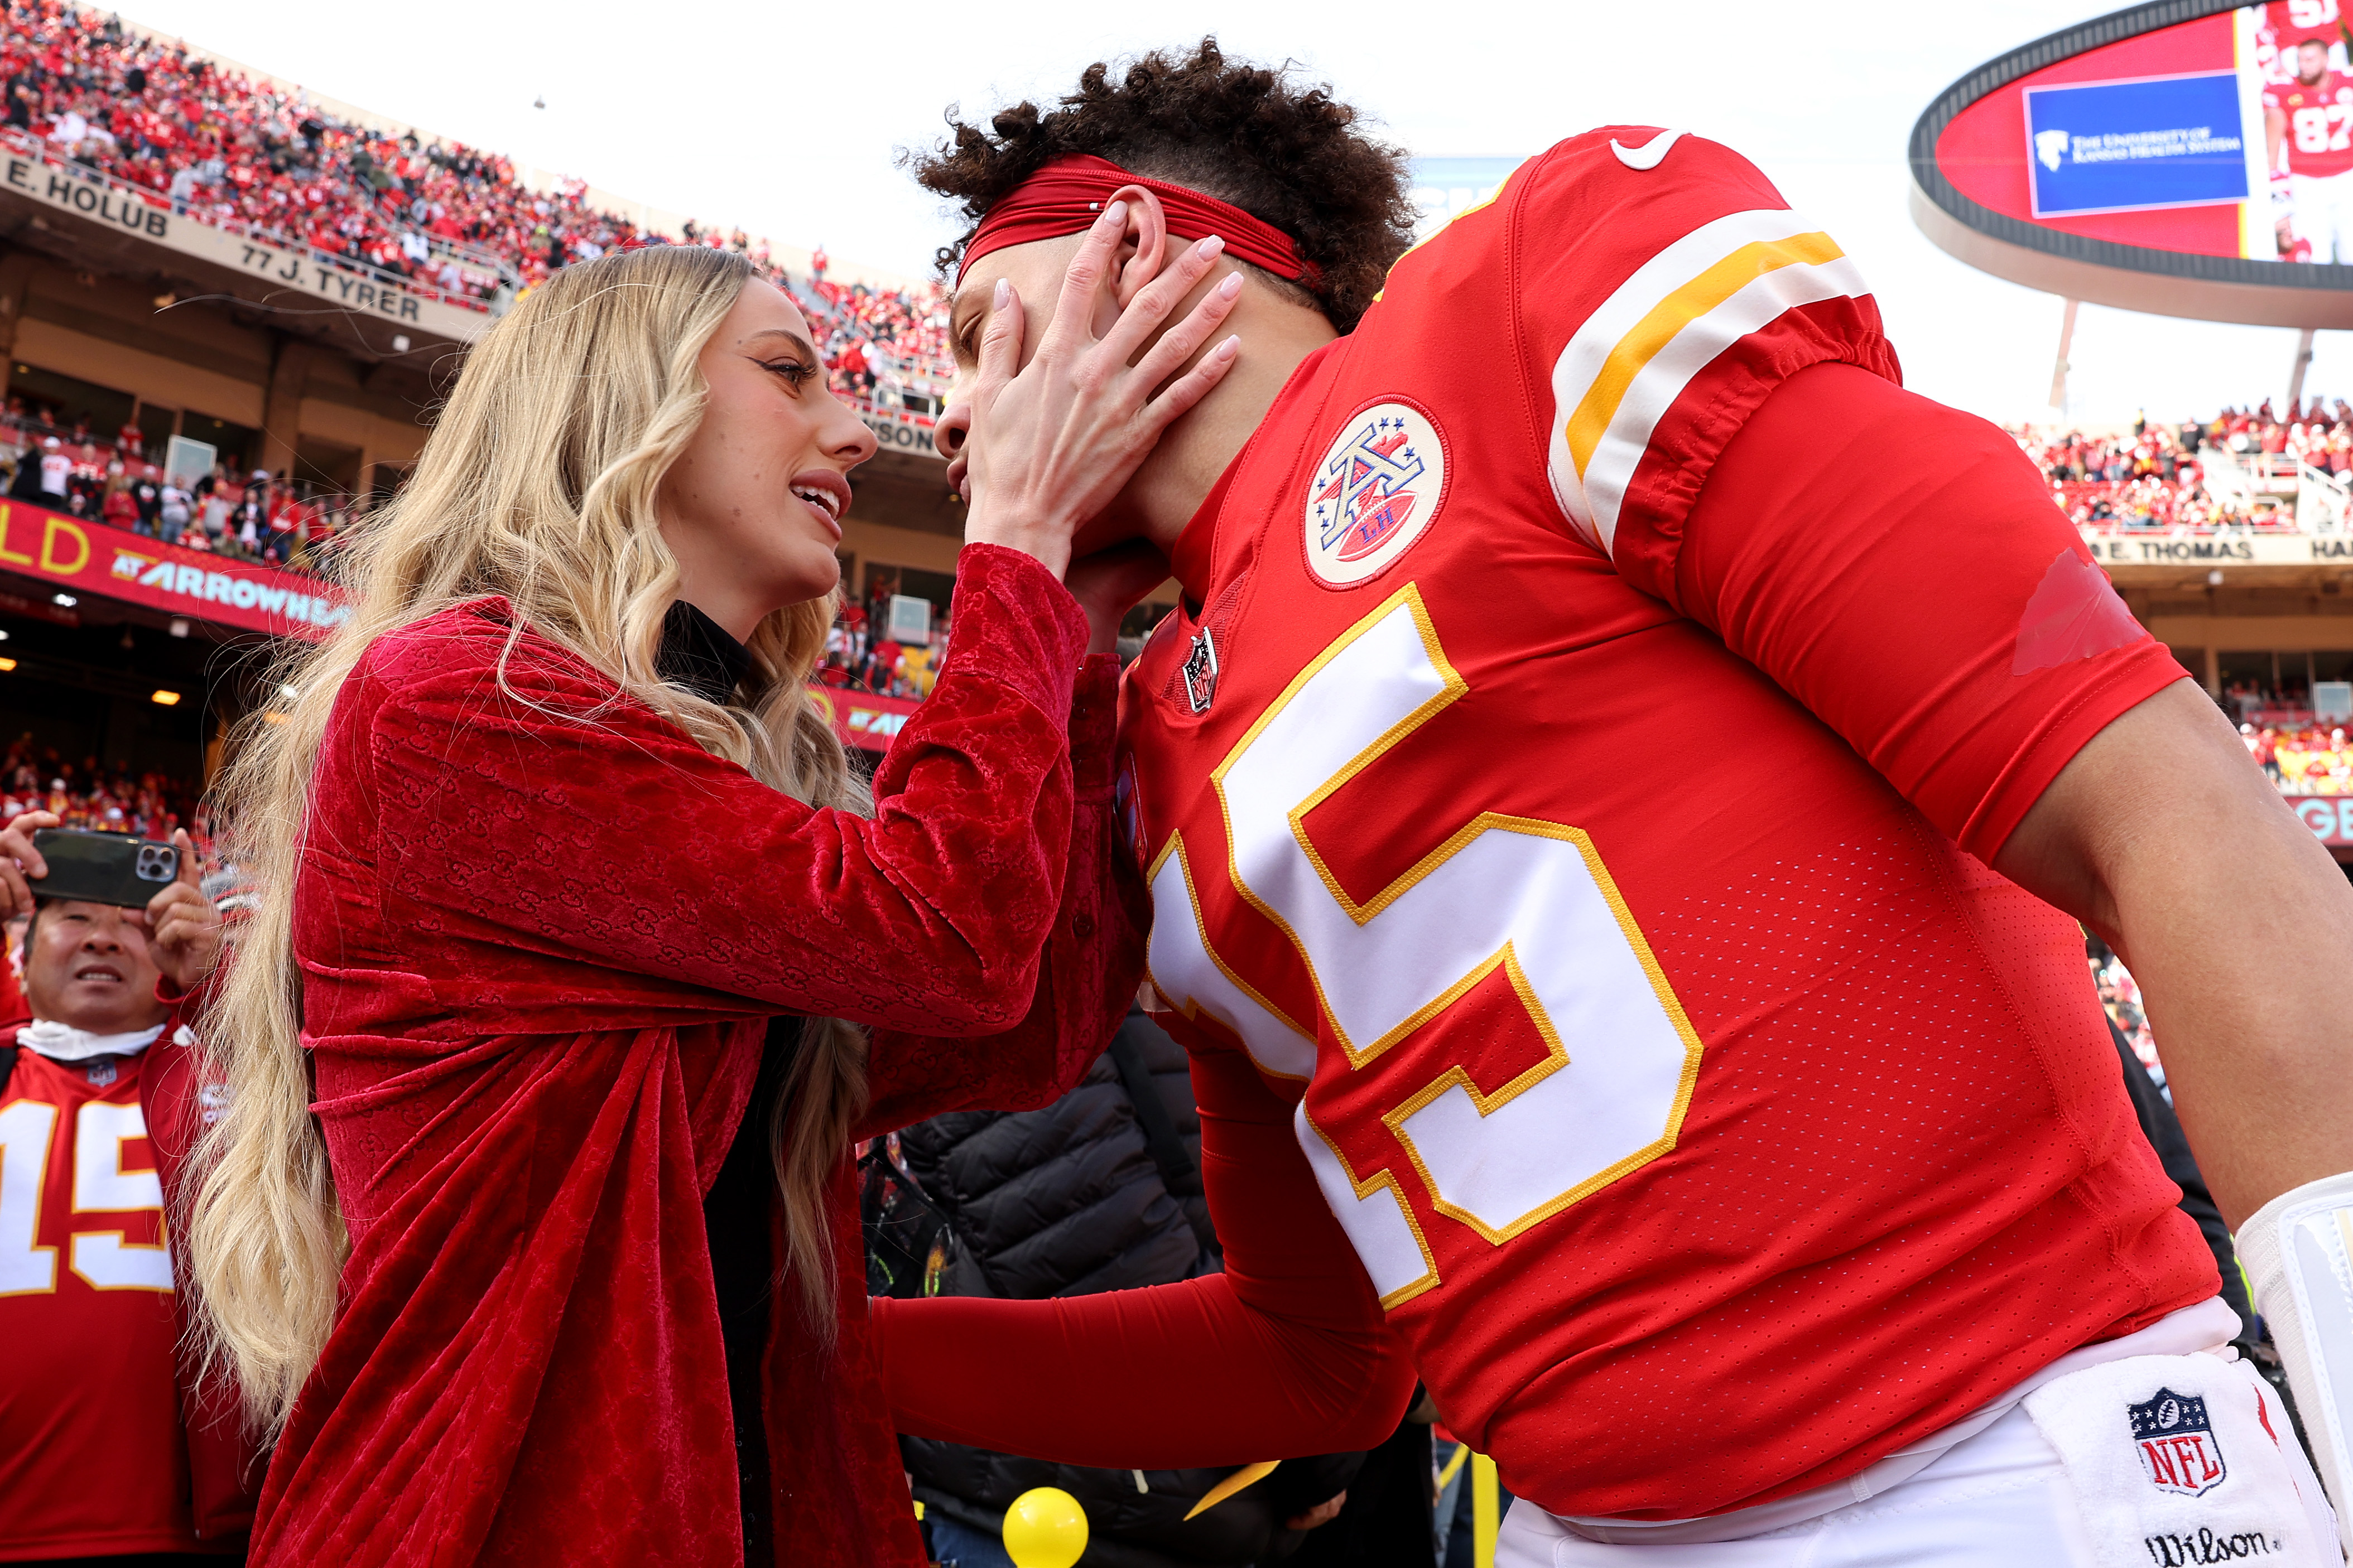 Patrick Mahomes kissing finacee Brittany Matthews before the start of the AFC Championship Game